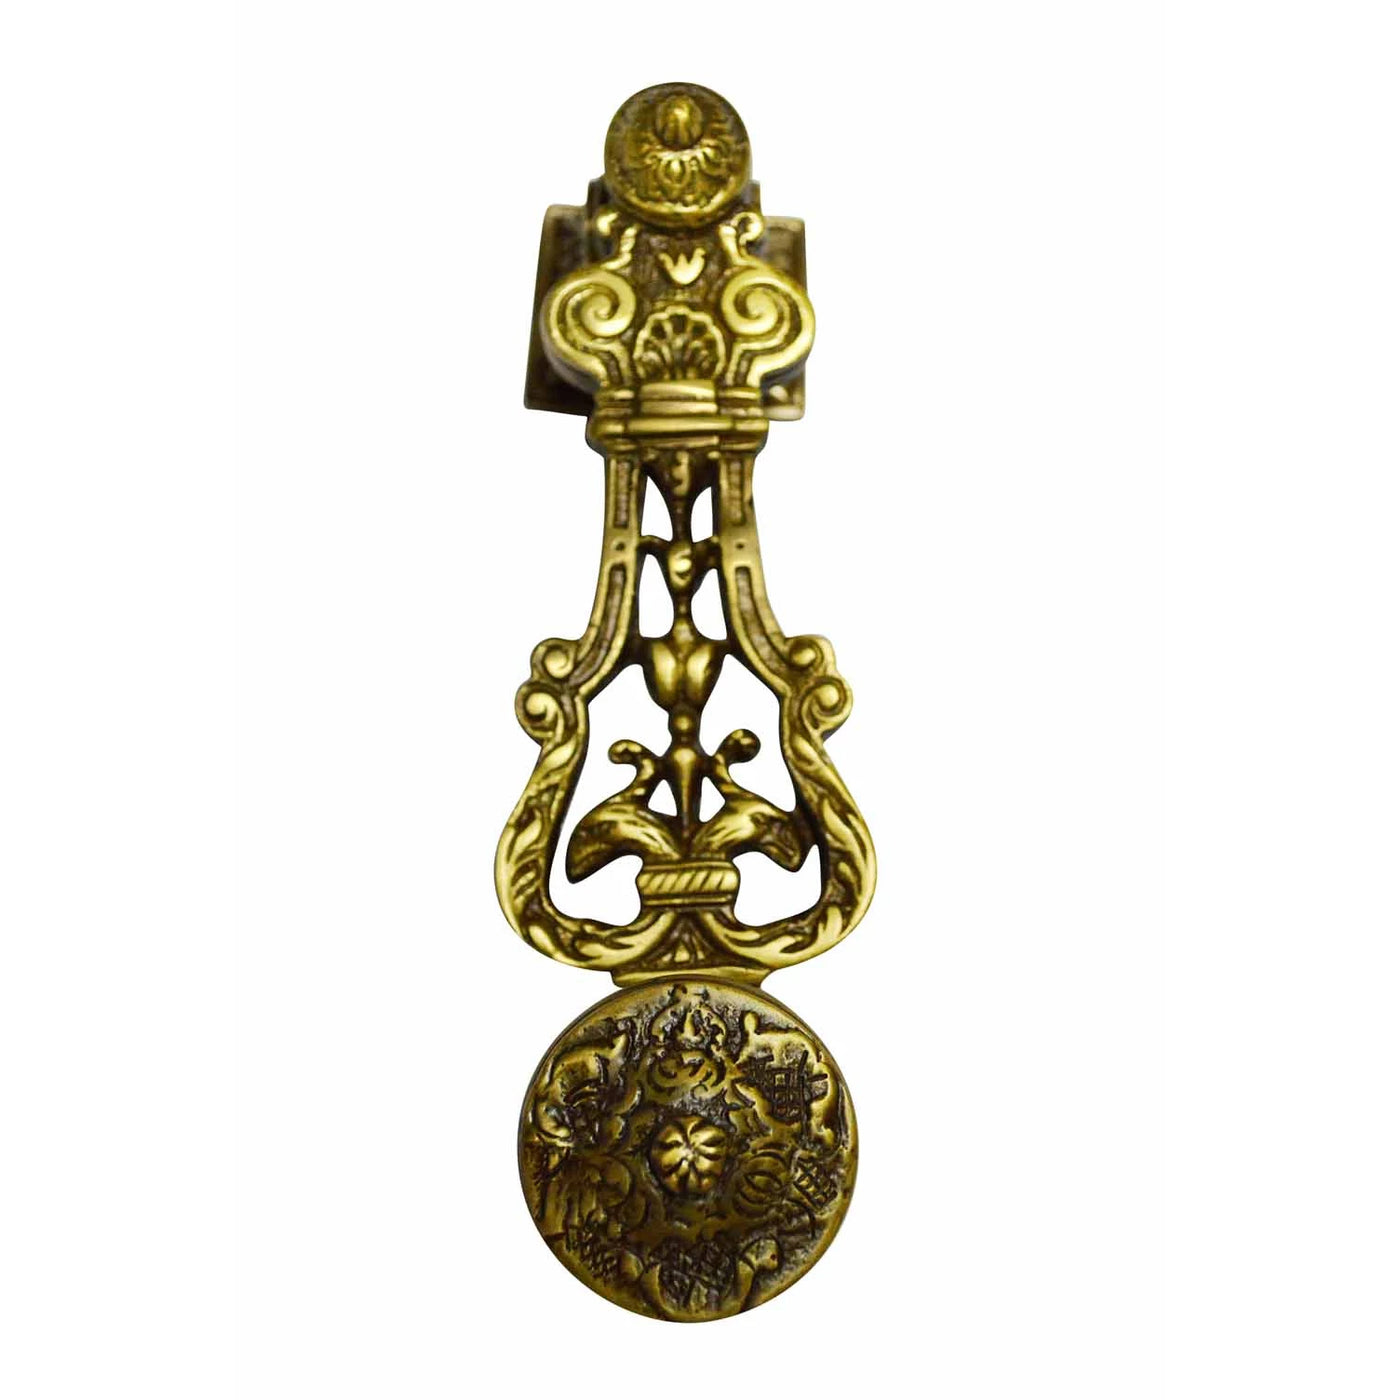 9 Inch (7 3/4 Inch c-c) French Empire Style Lost Wax Cast Door Knocker (Antique Brass Finish)